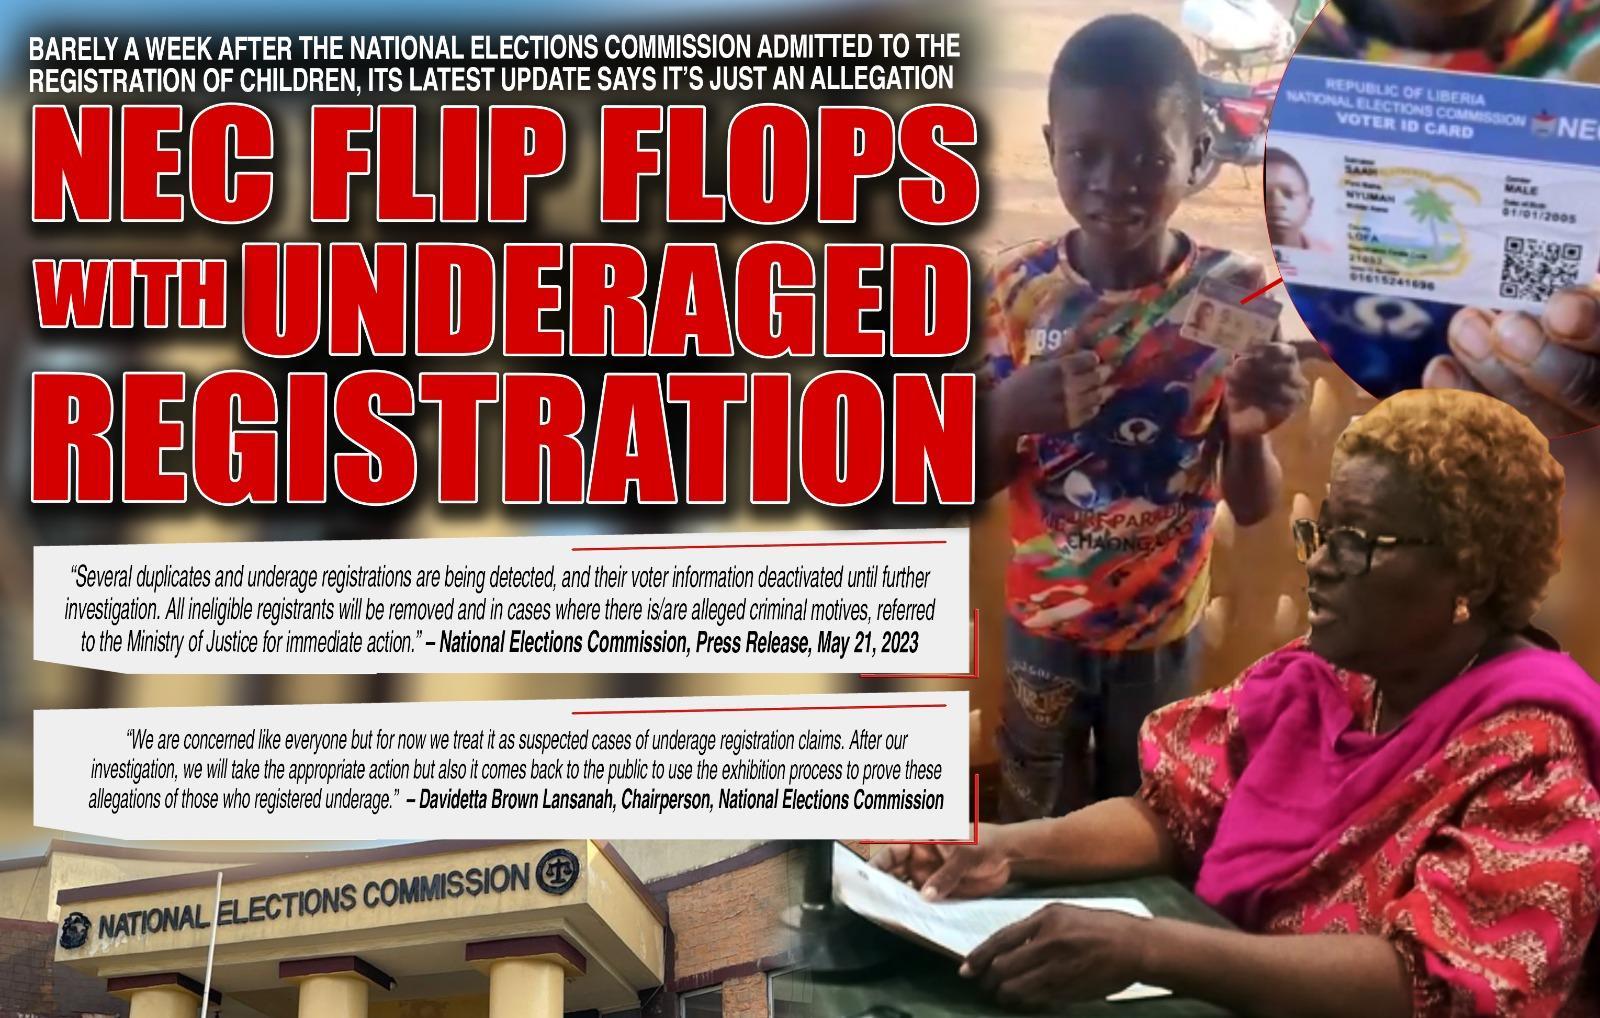 National Elections Commission Reverses Stance on Allegations of Underage Voter Registration